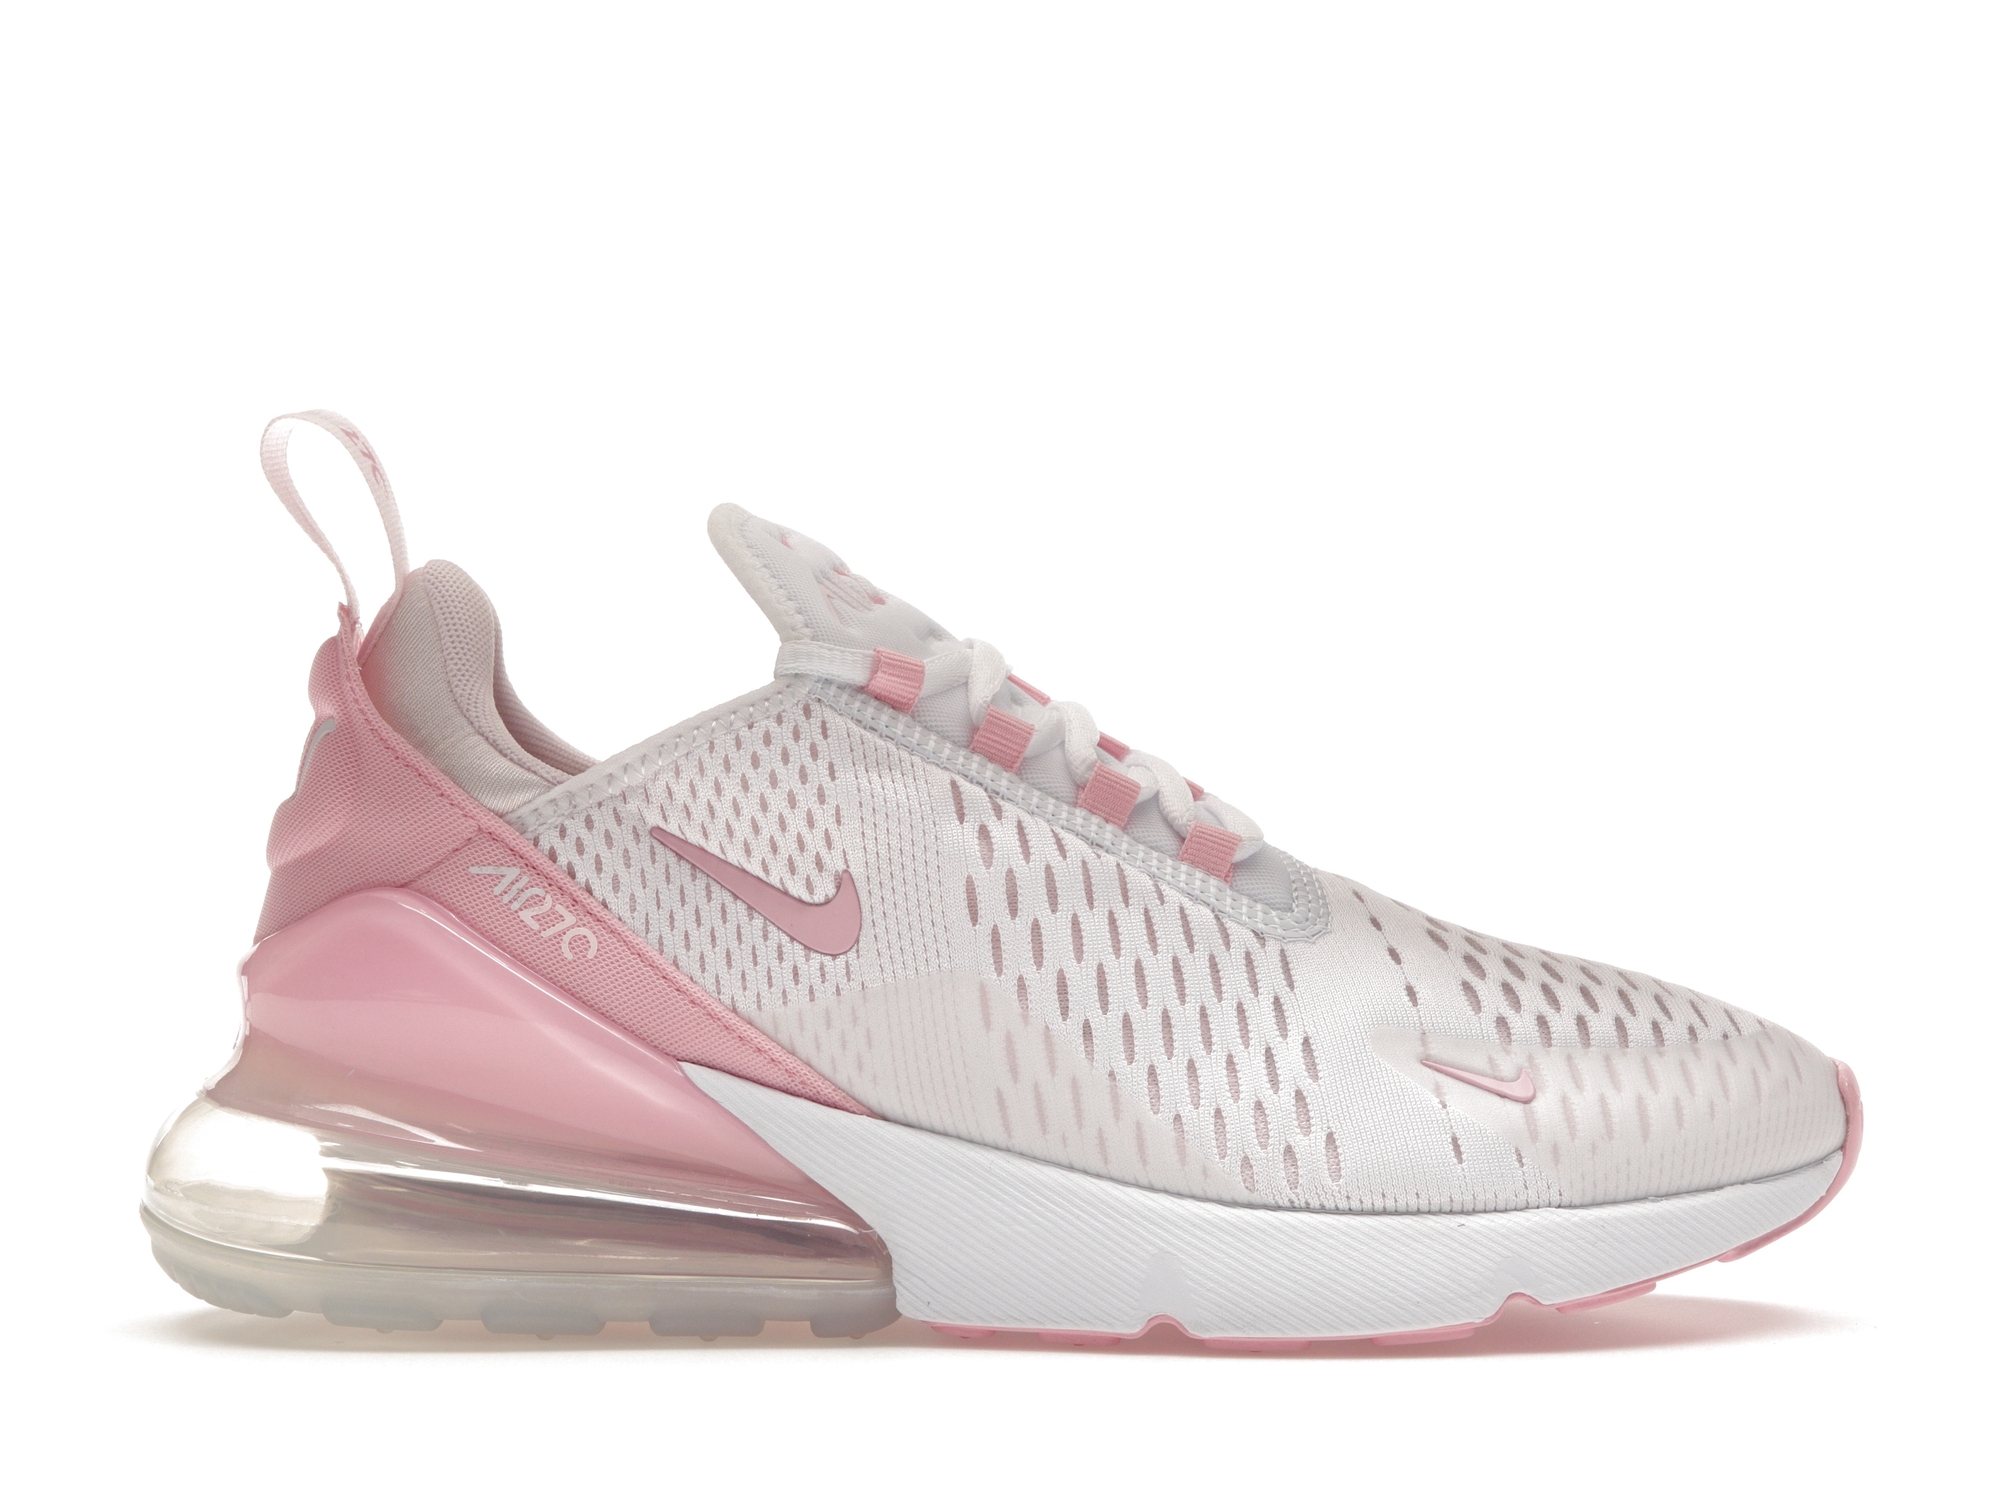 Buy Nike Air Shoes For Women At Best Price Online In India | Myntra